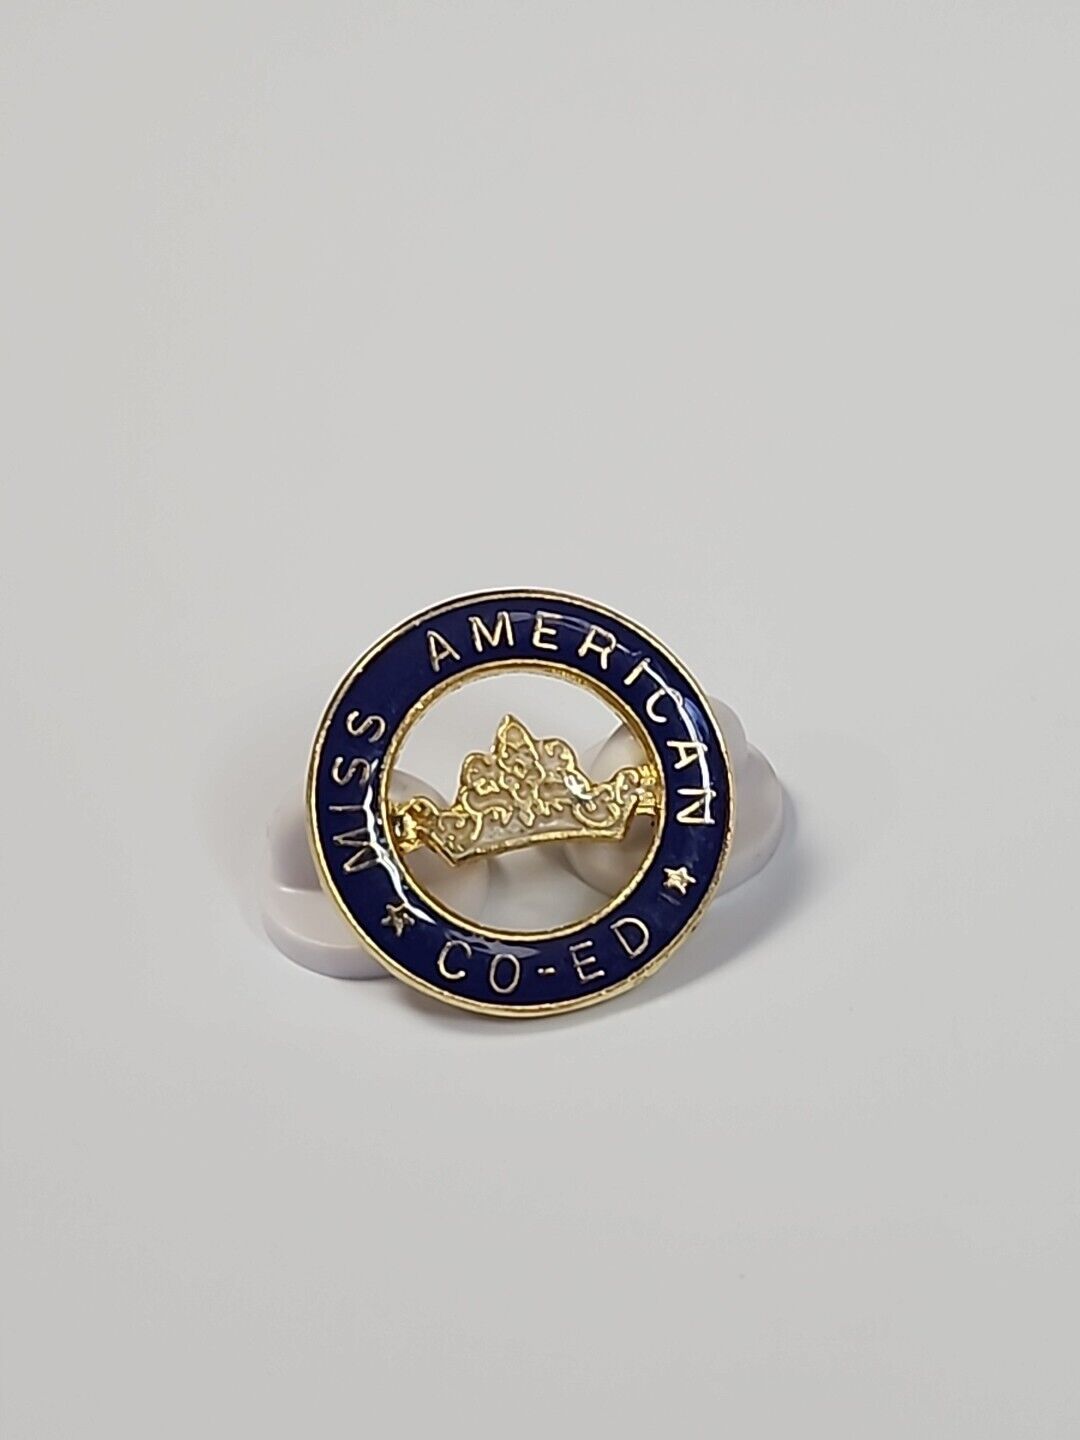 Miss American Co-ed Lapel Pin Beauty Pageant